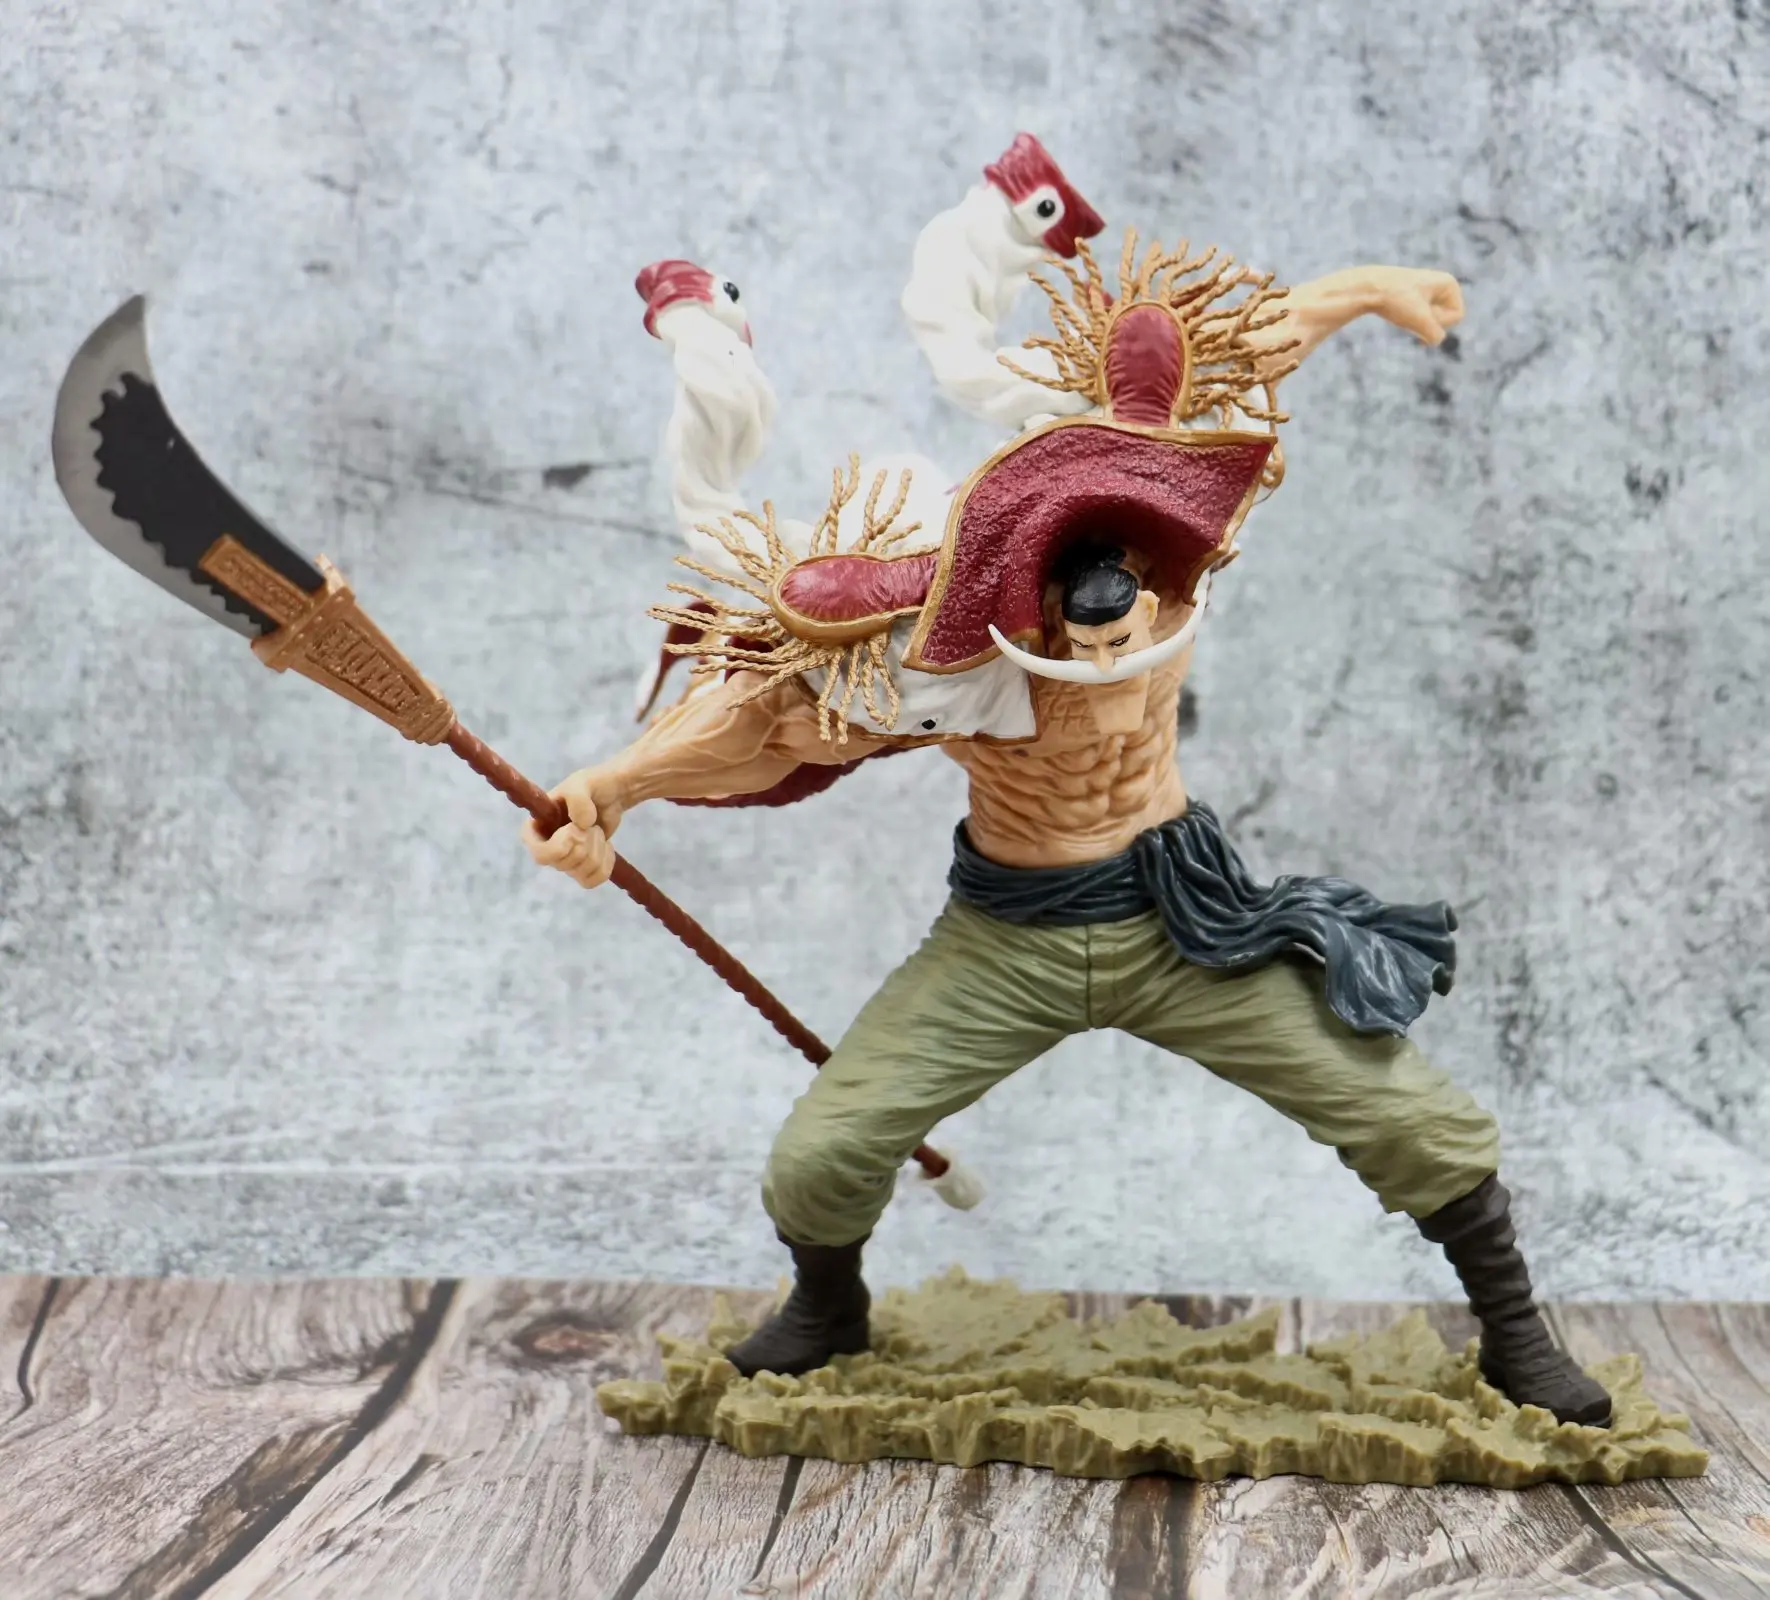 

Anime One Piece SCultures the TAG Team Edward Newgate 20th Figure Statue One Piece White Beard Figure Collectible Model Toy